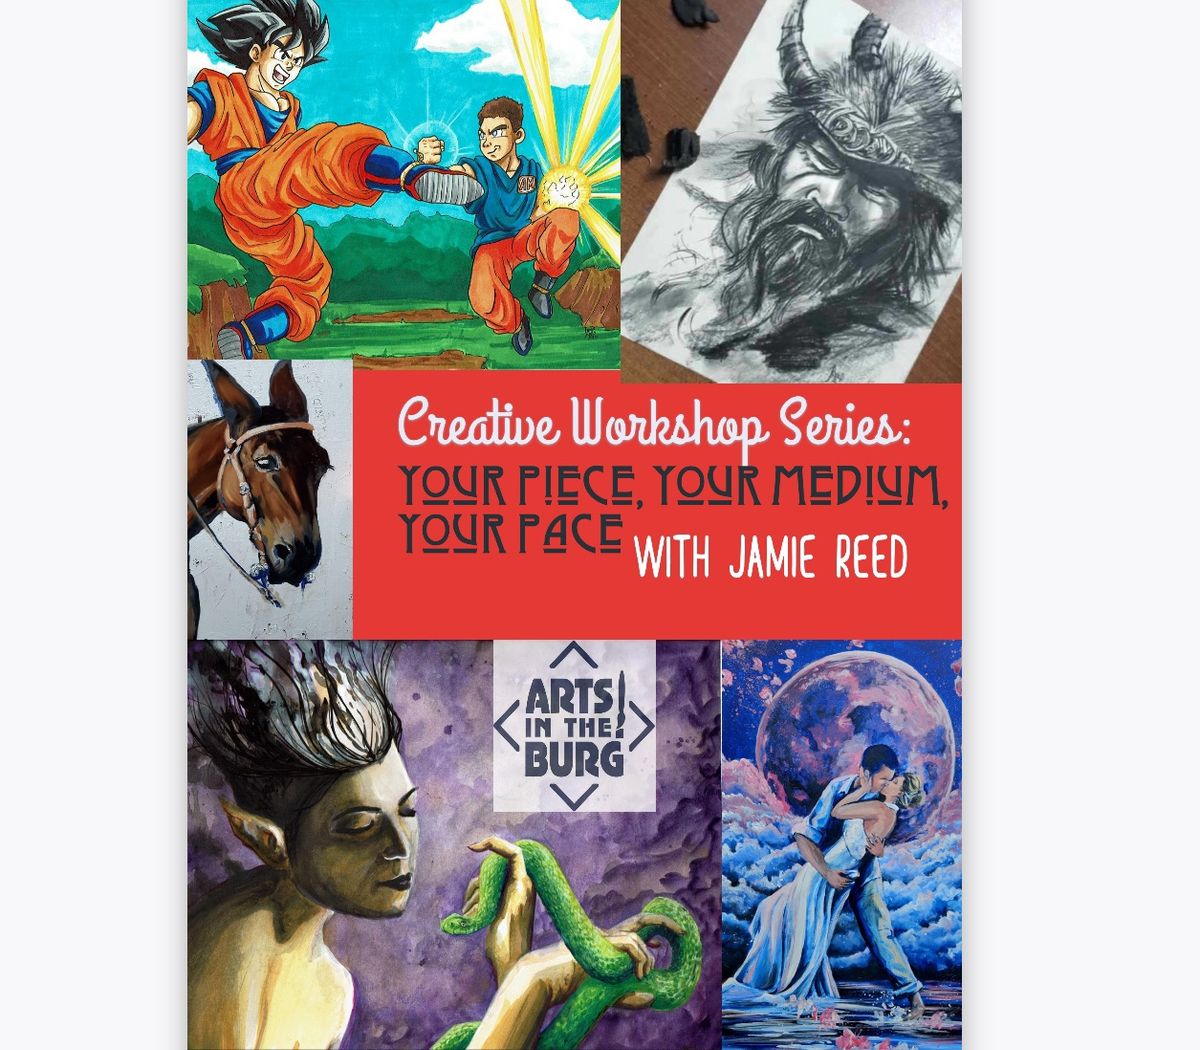 Open Creative Workshop Series: Your Pic, Your Medium, Your Pace with Jamie Reed